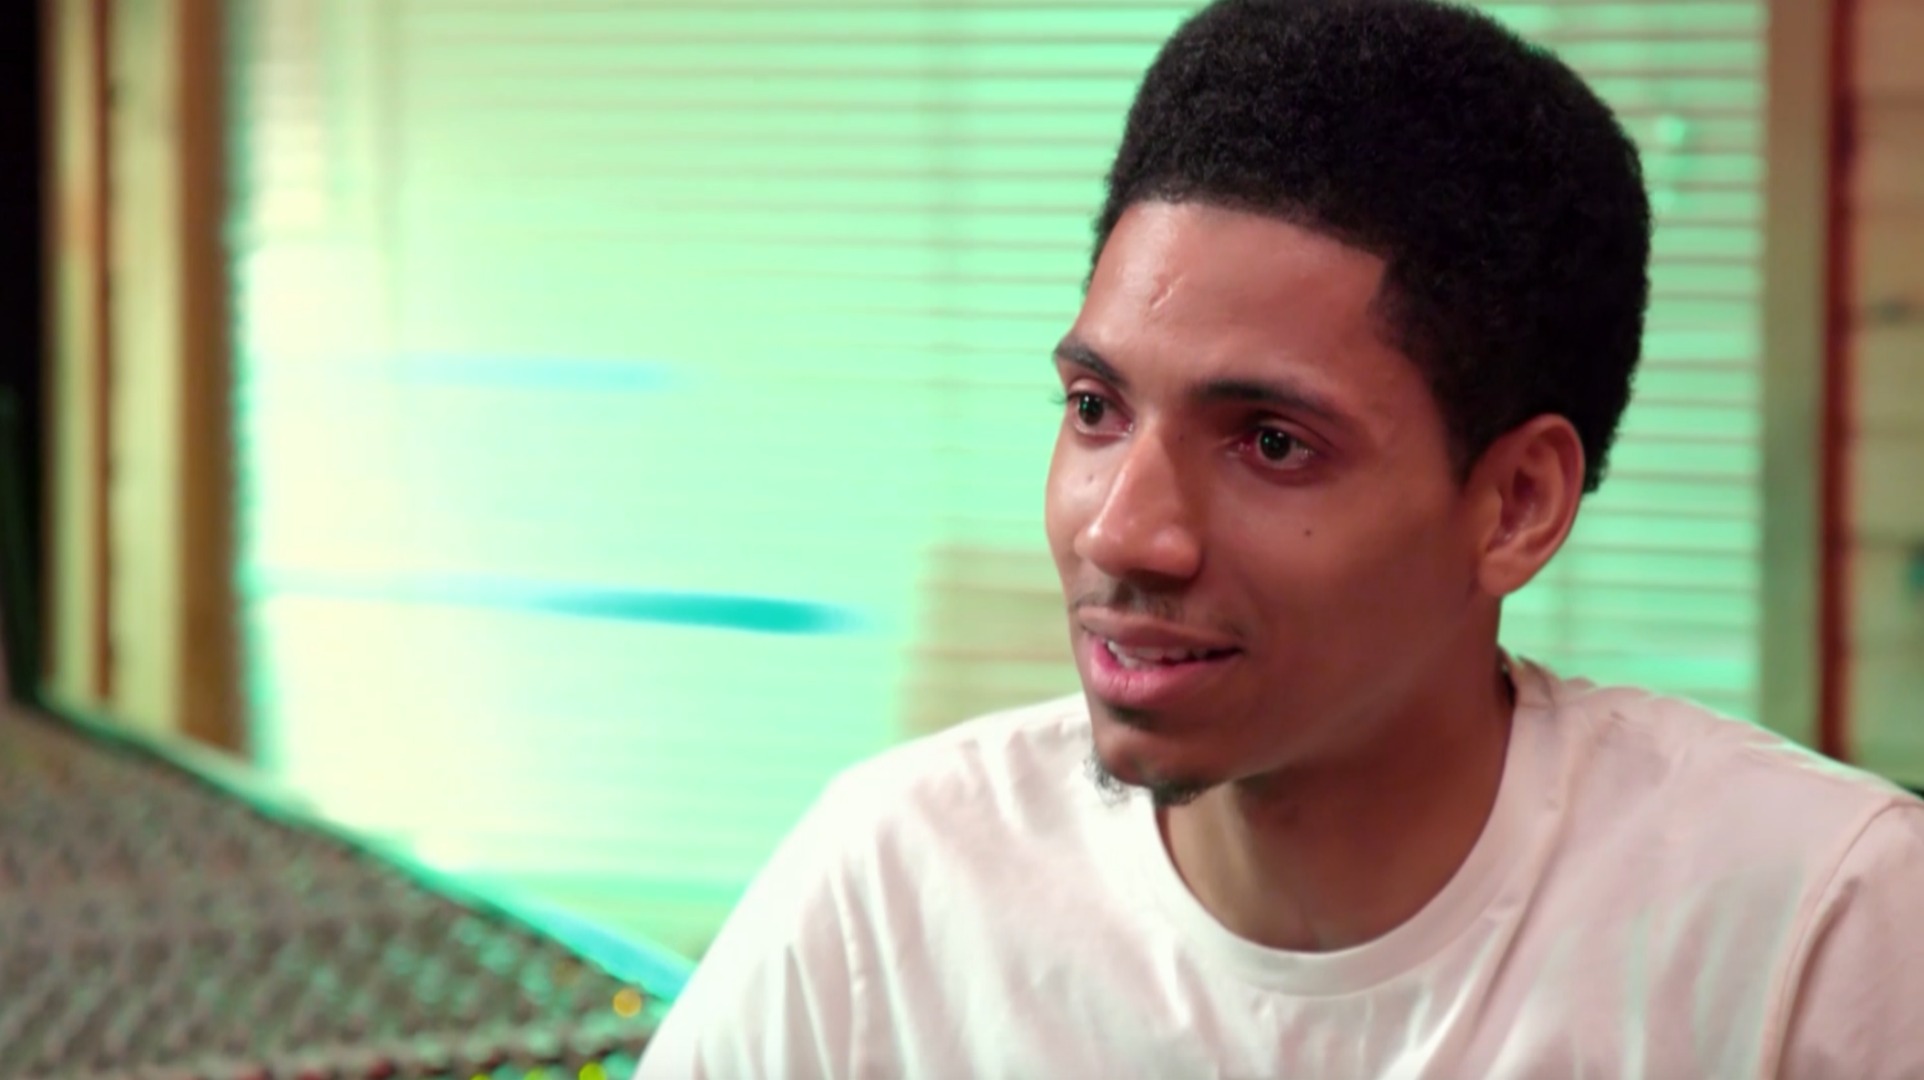 Watch Arnstar Opens Up About His Childhood | Growing Up Hip Hop: New York Video Extras